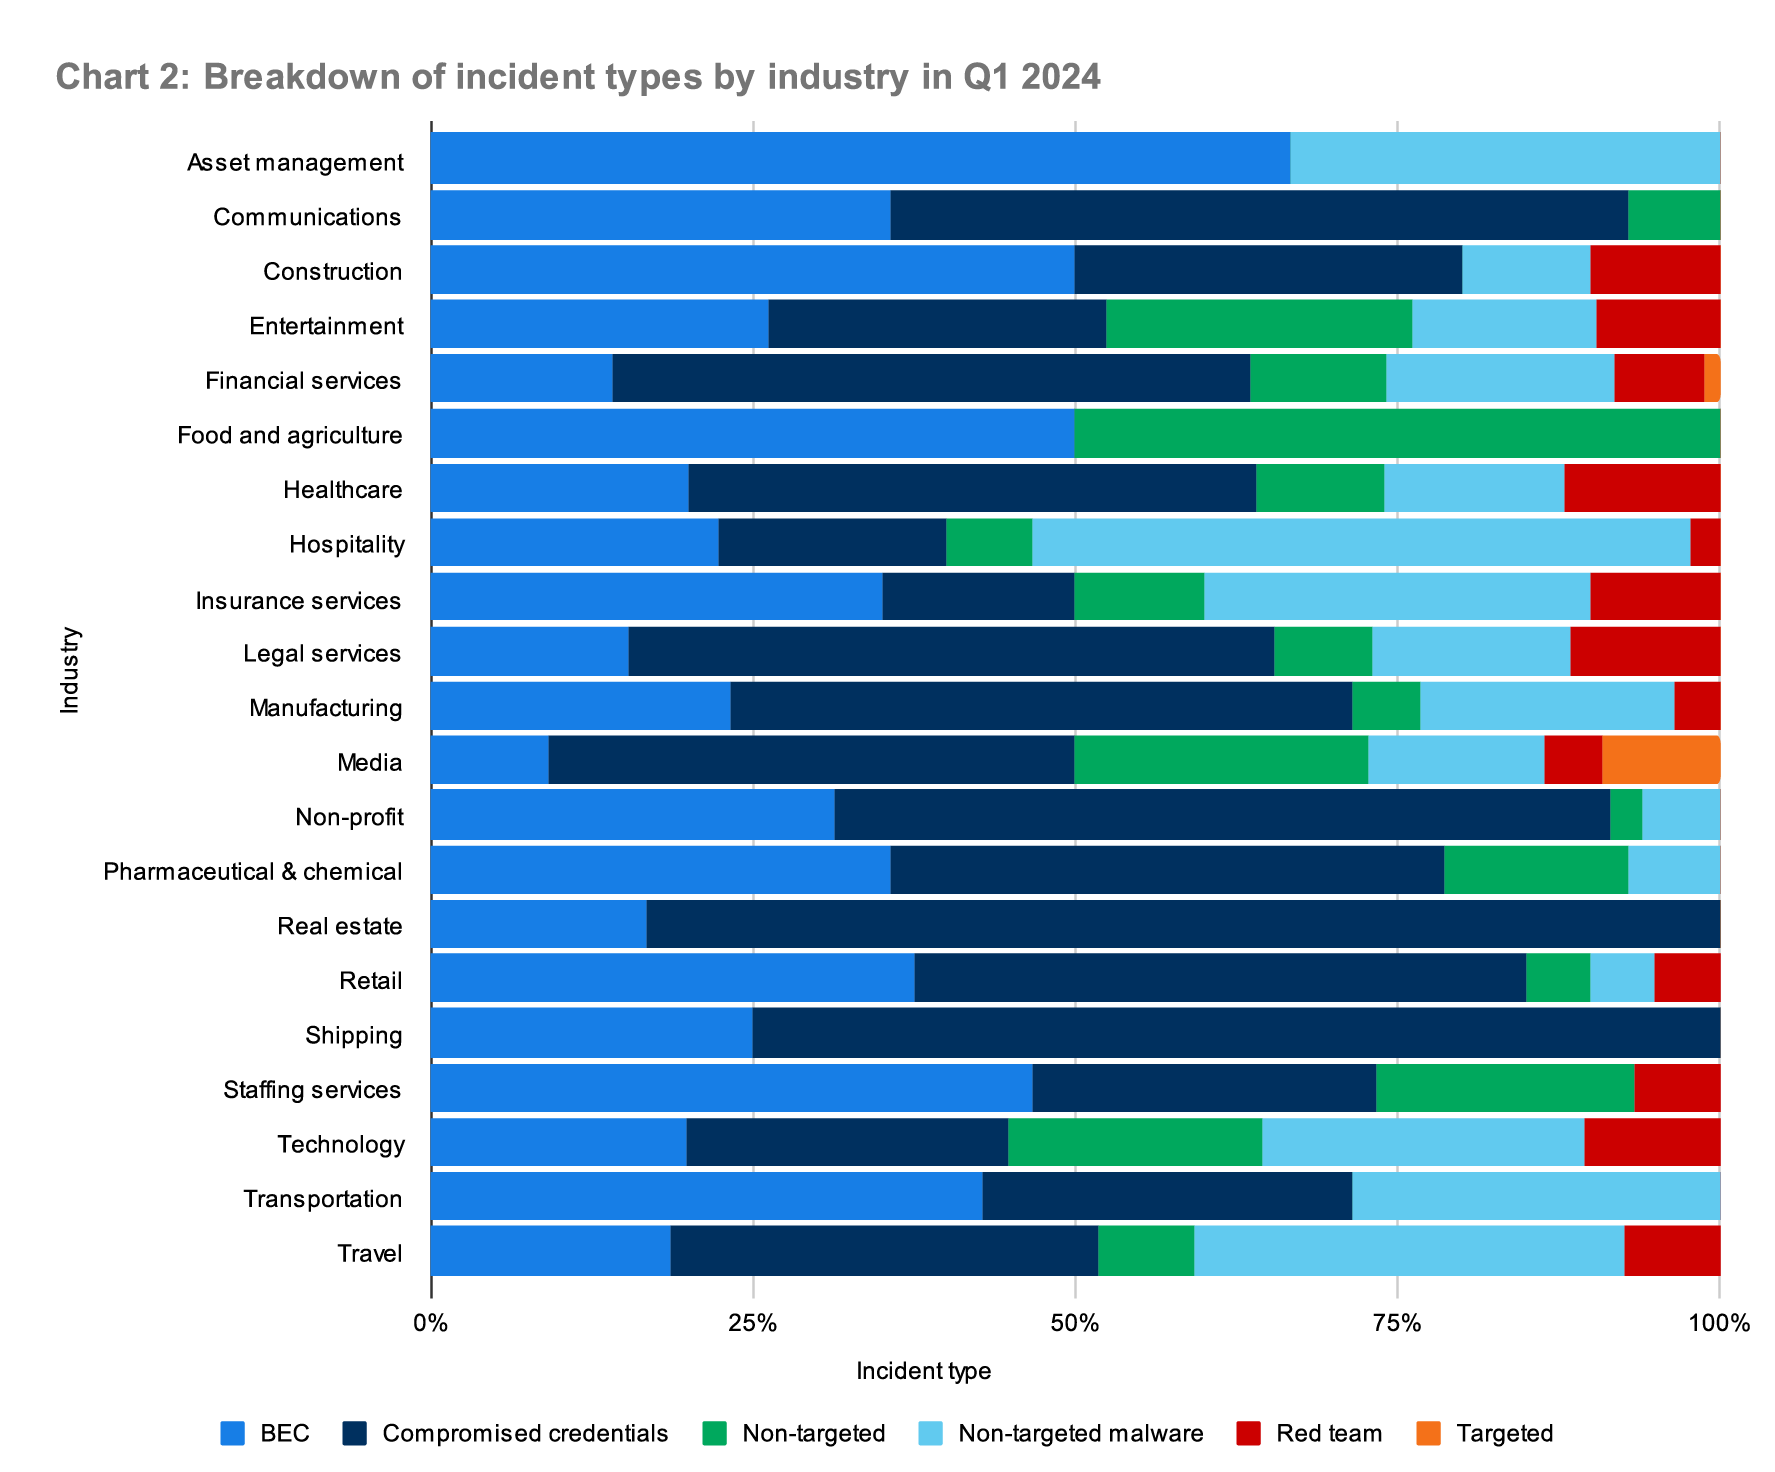 Breakdown of incident types by industry in the Expel SOC Q1 2024